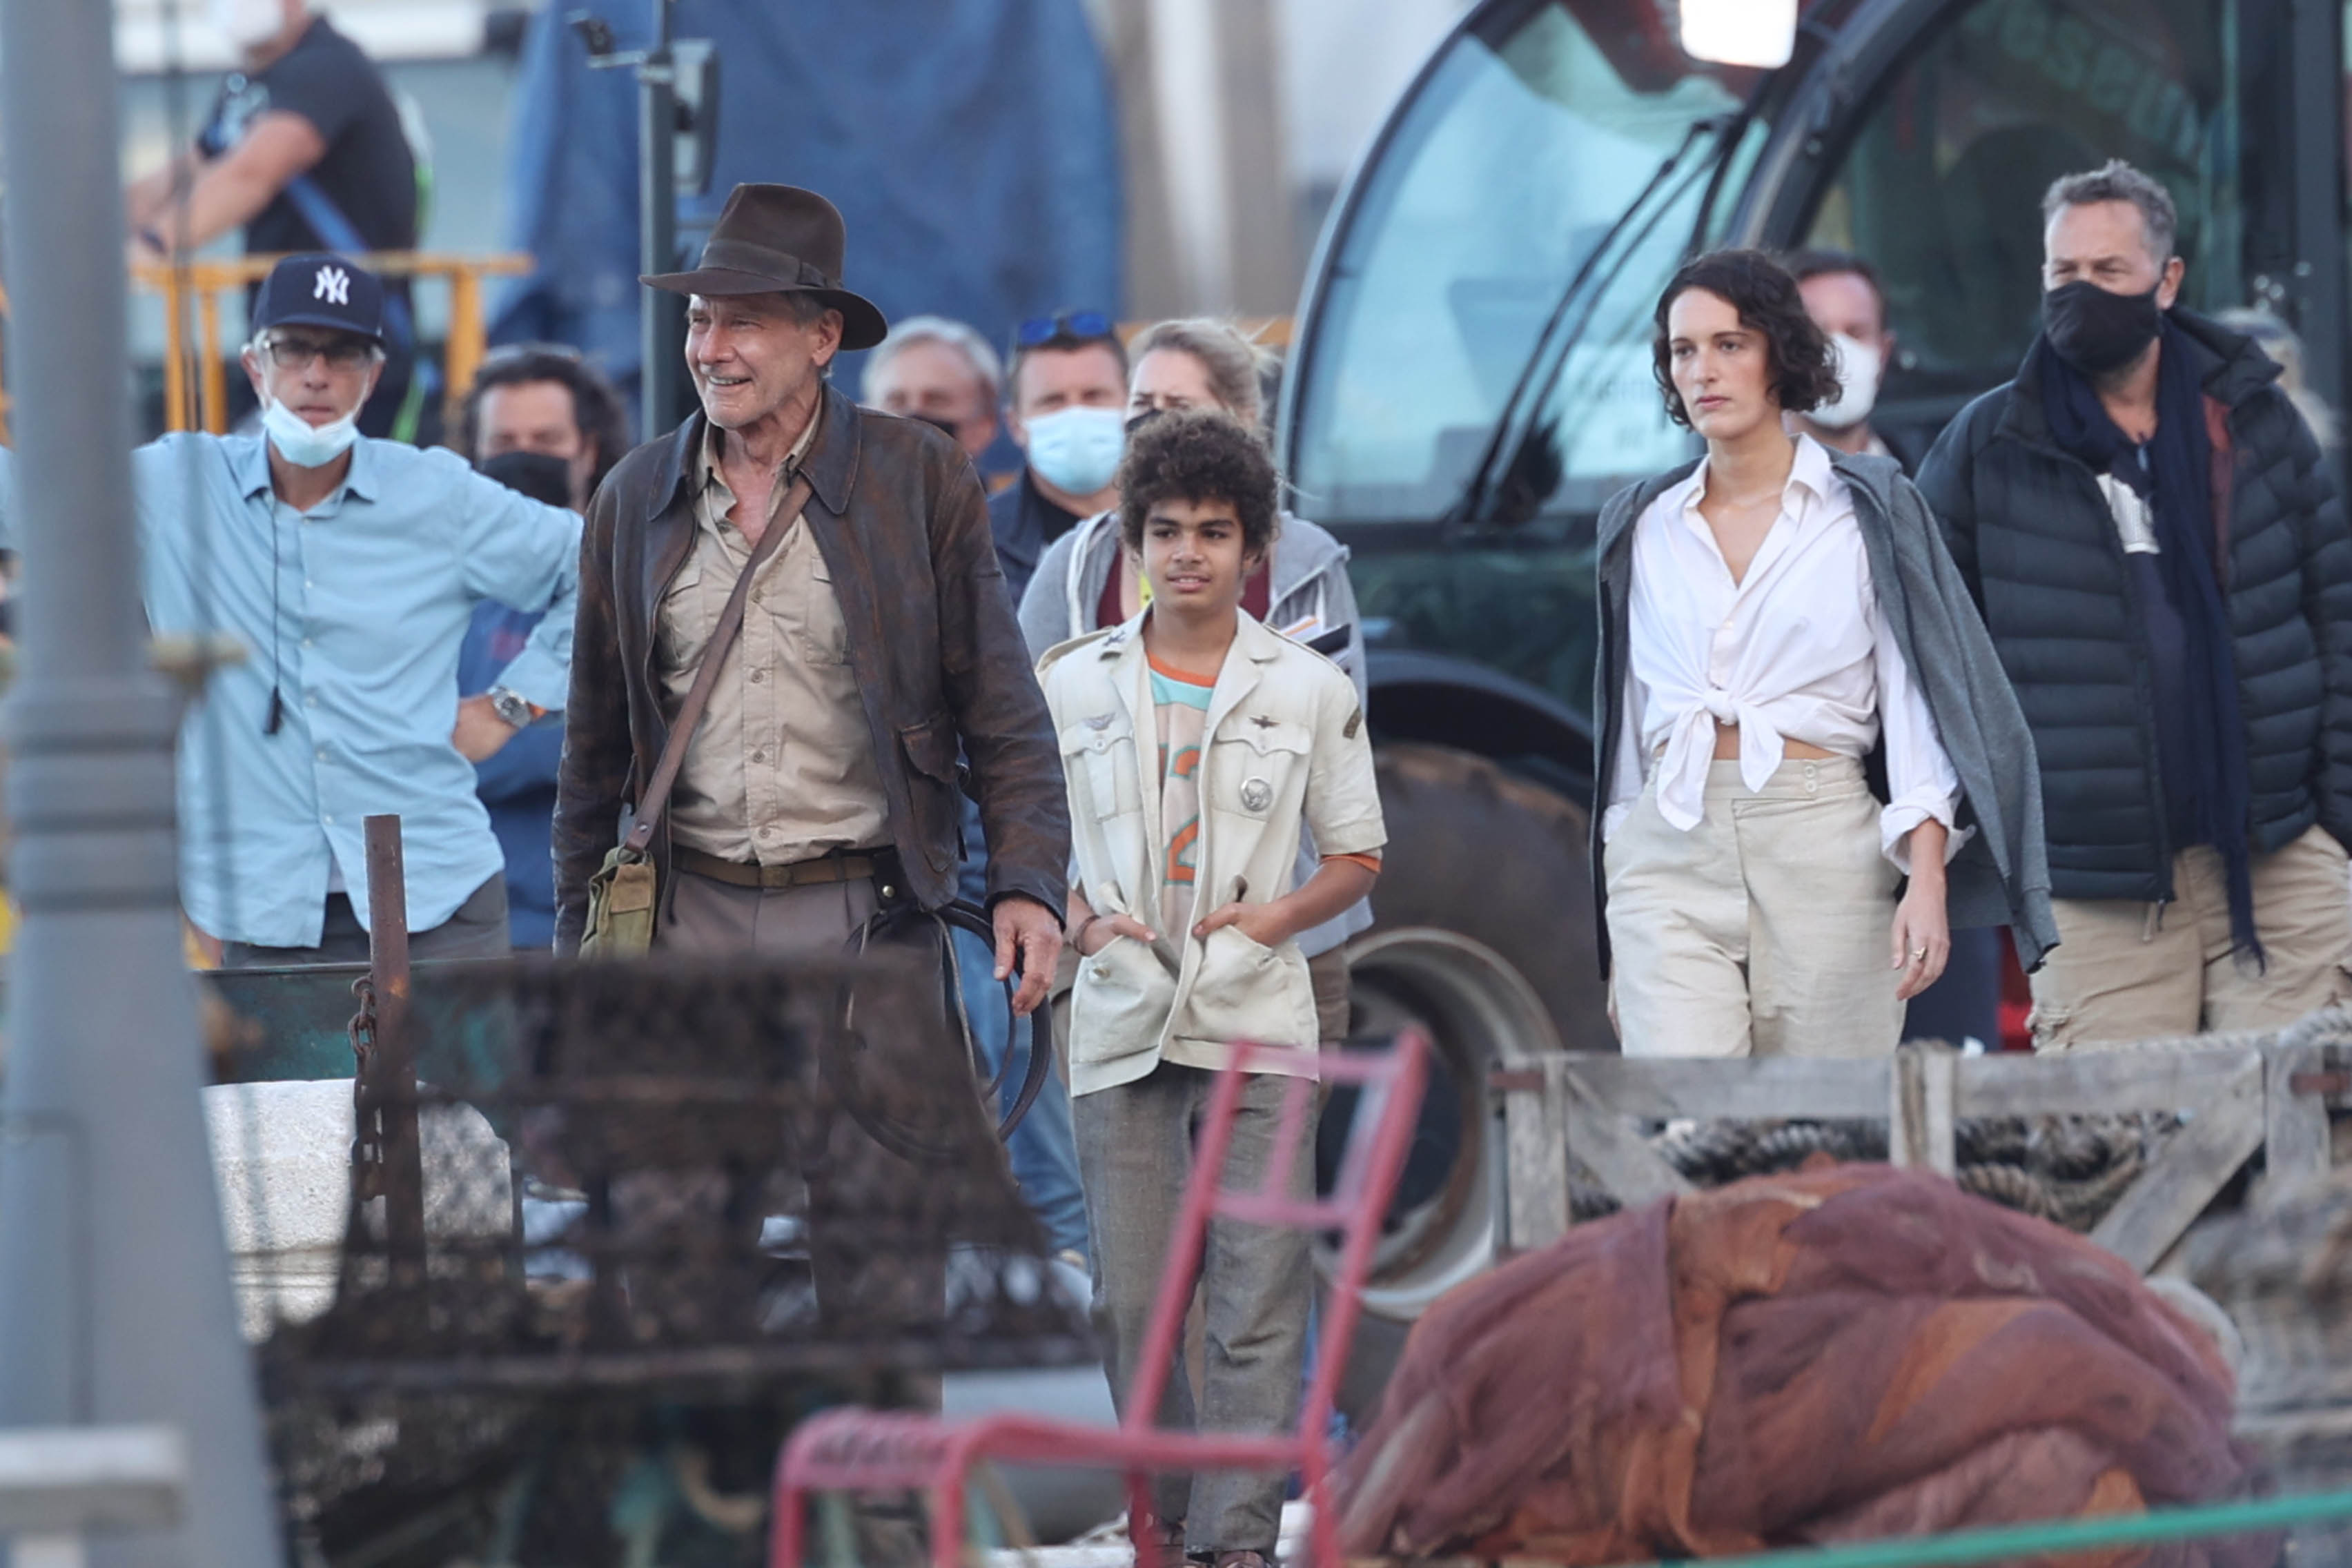 Harrison Ford, Phoebe Waller-Bridge are seen on the set of “Indiana Jones 5” in Sicily on October 18, 2021 in Castellammare del Golfo, Italy